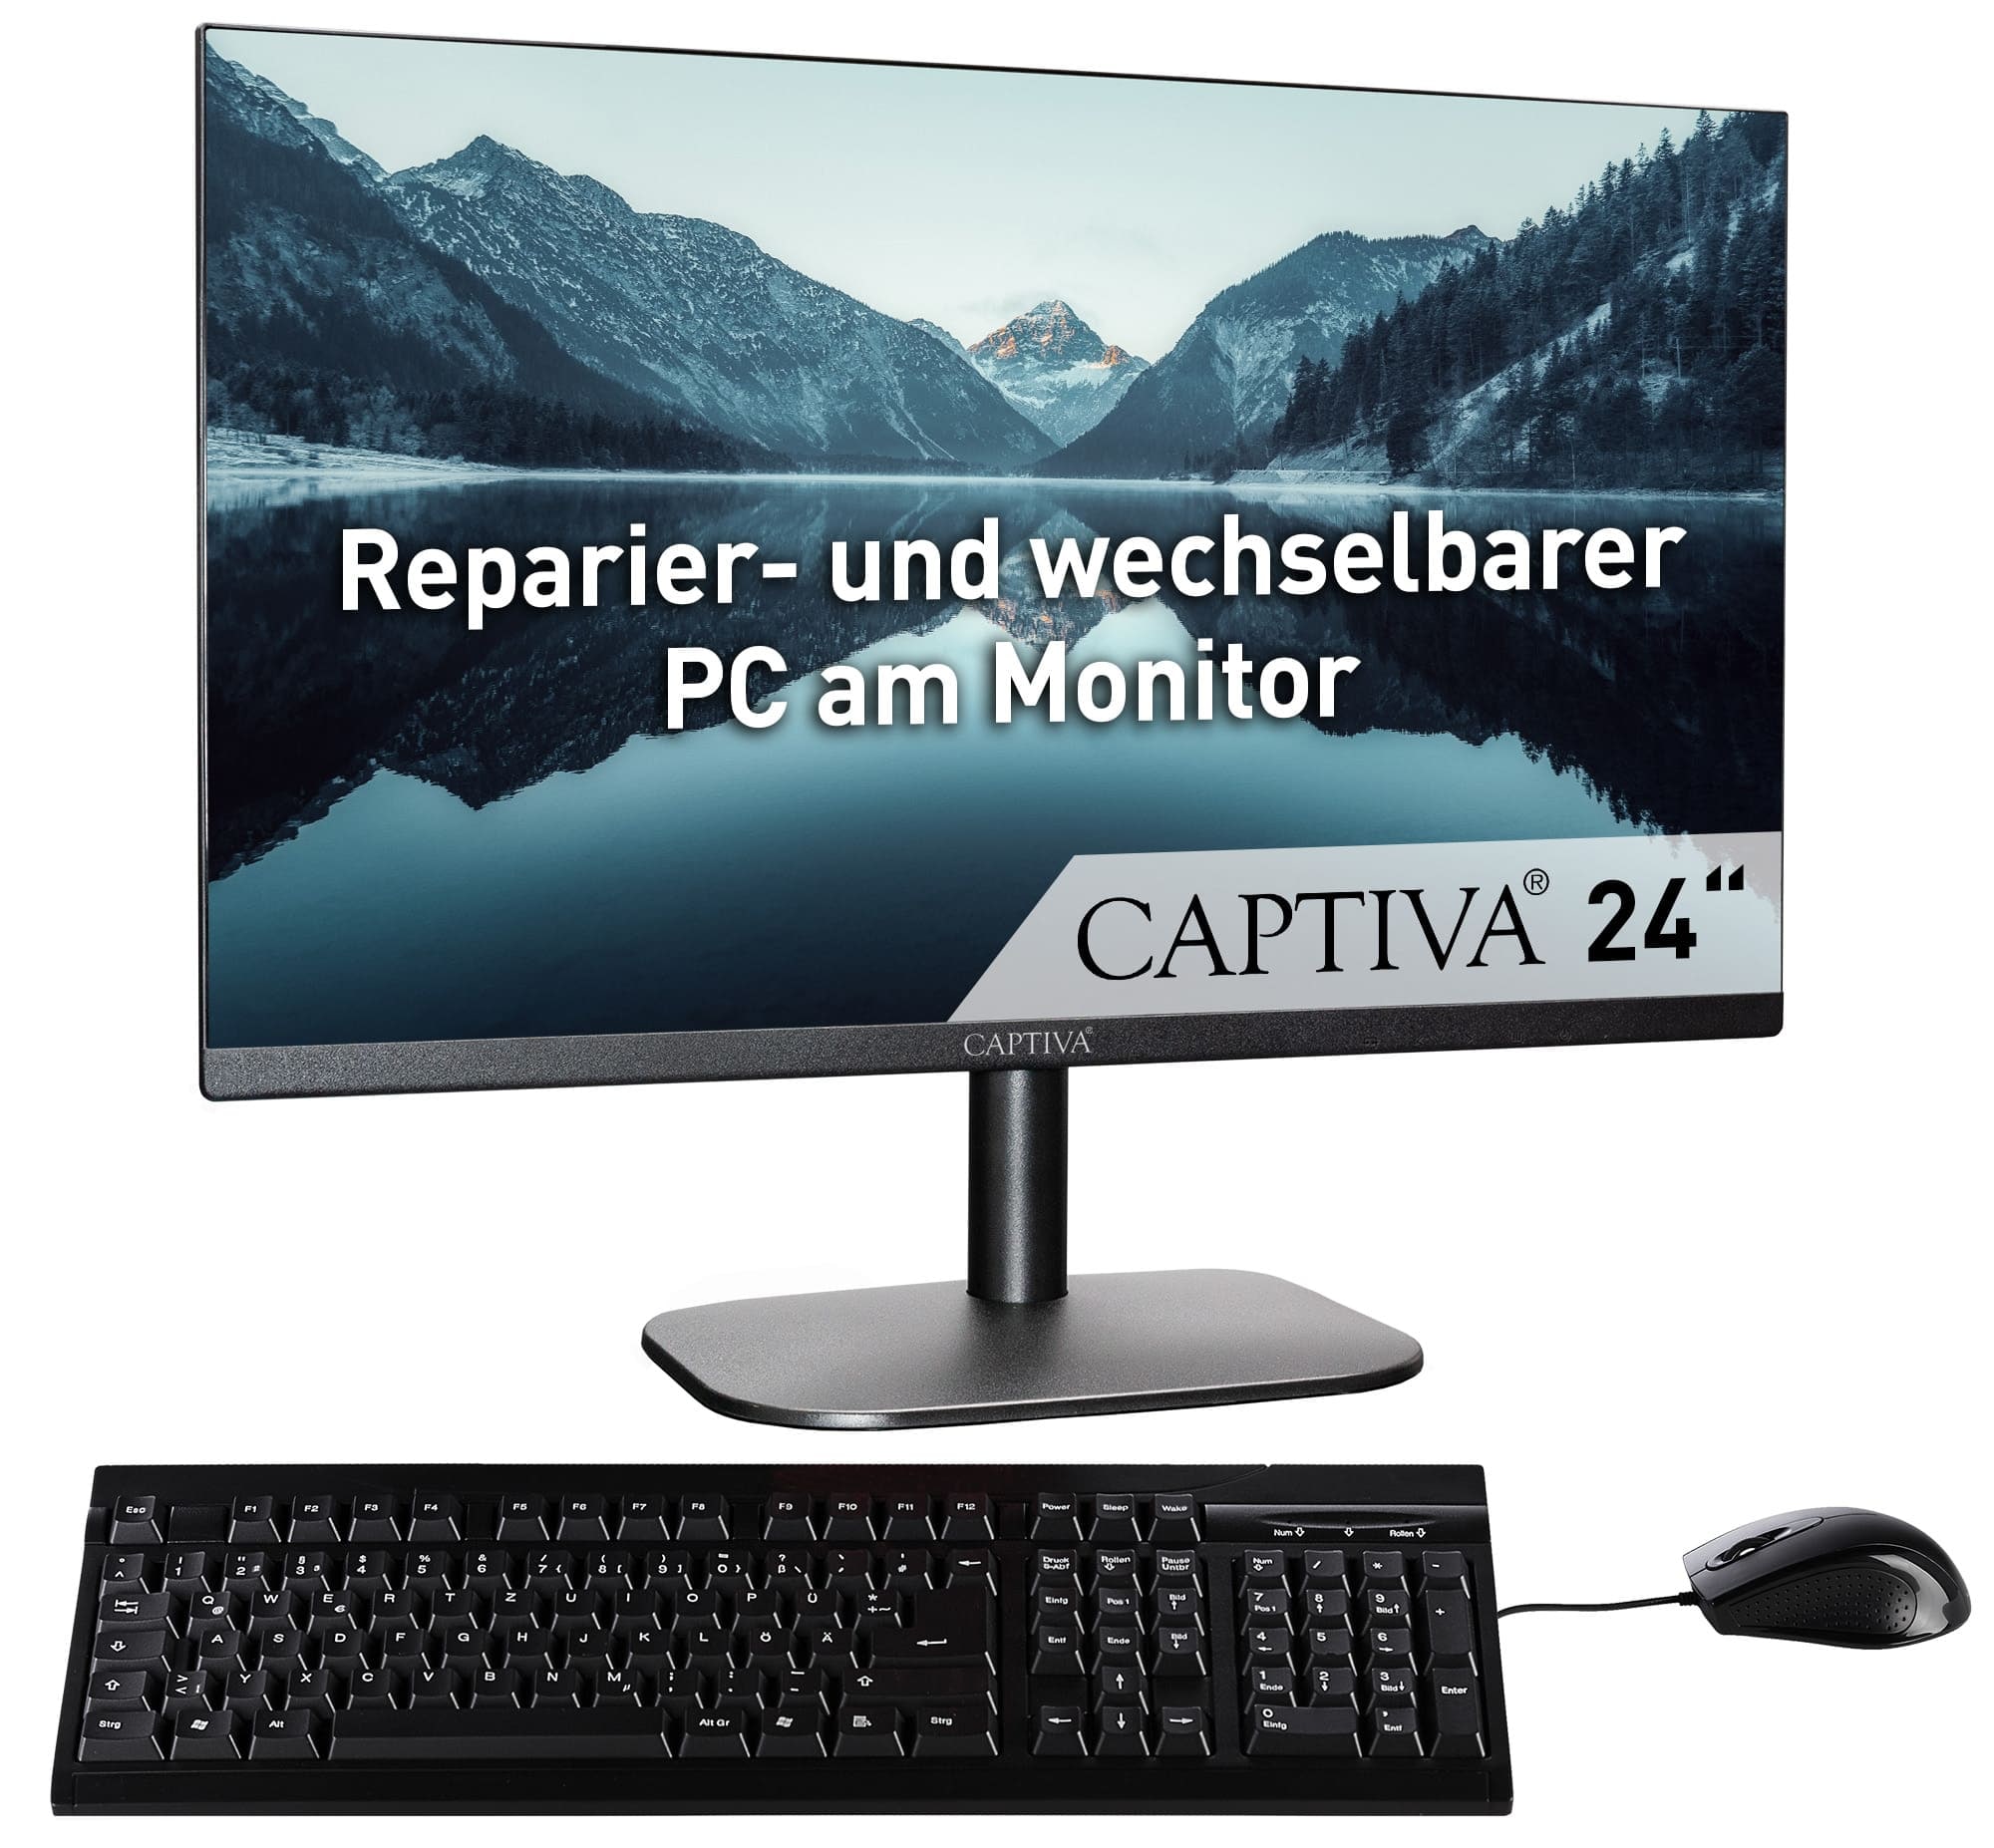 CAPTIVA All-in-One PC »All-In-One Power Starter I82-200«